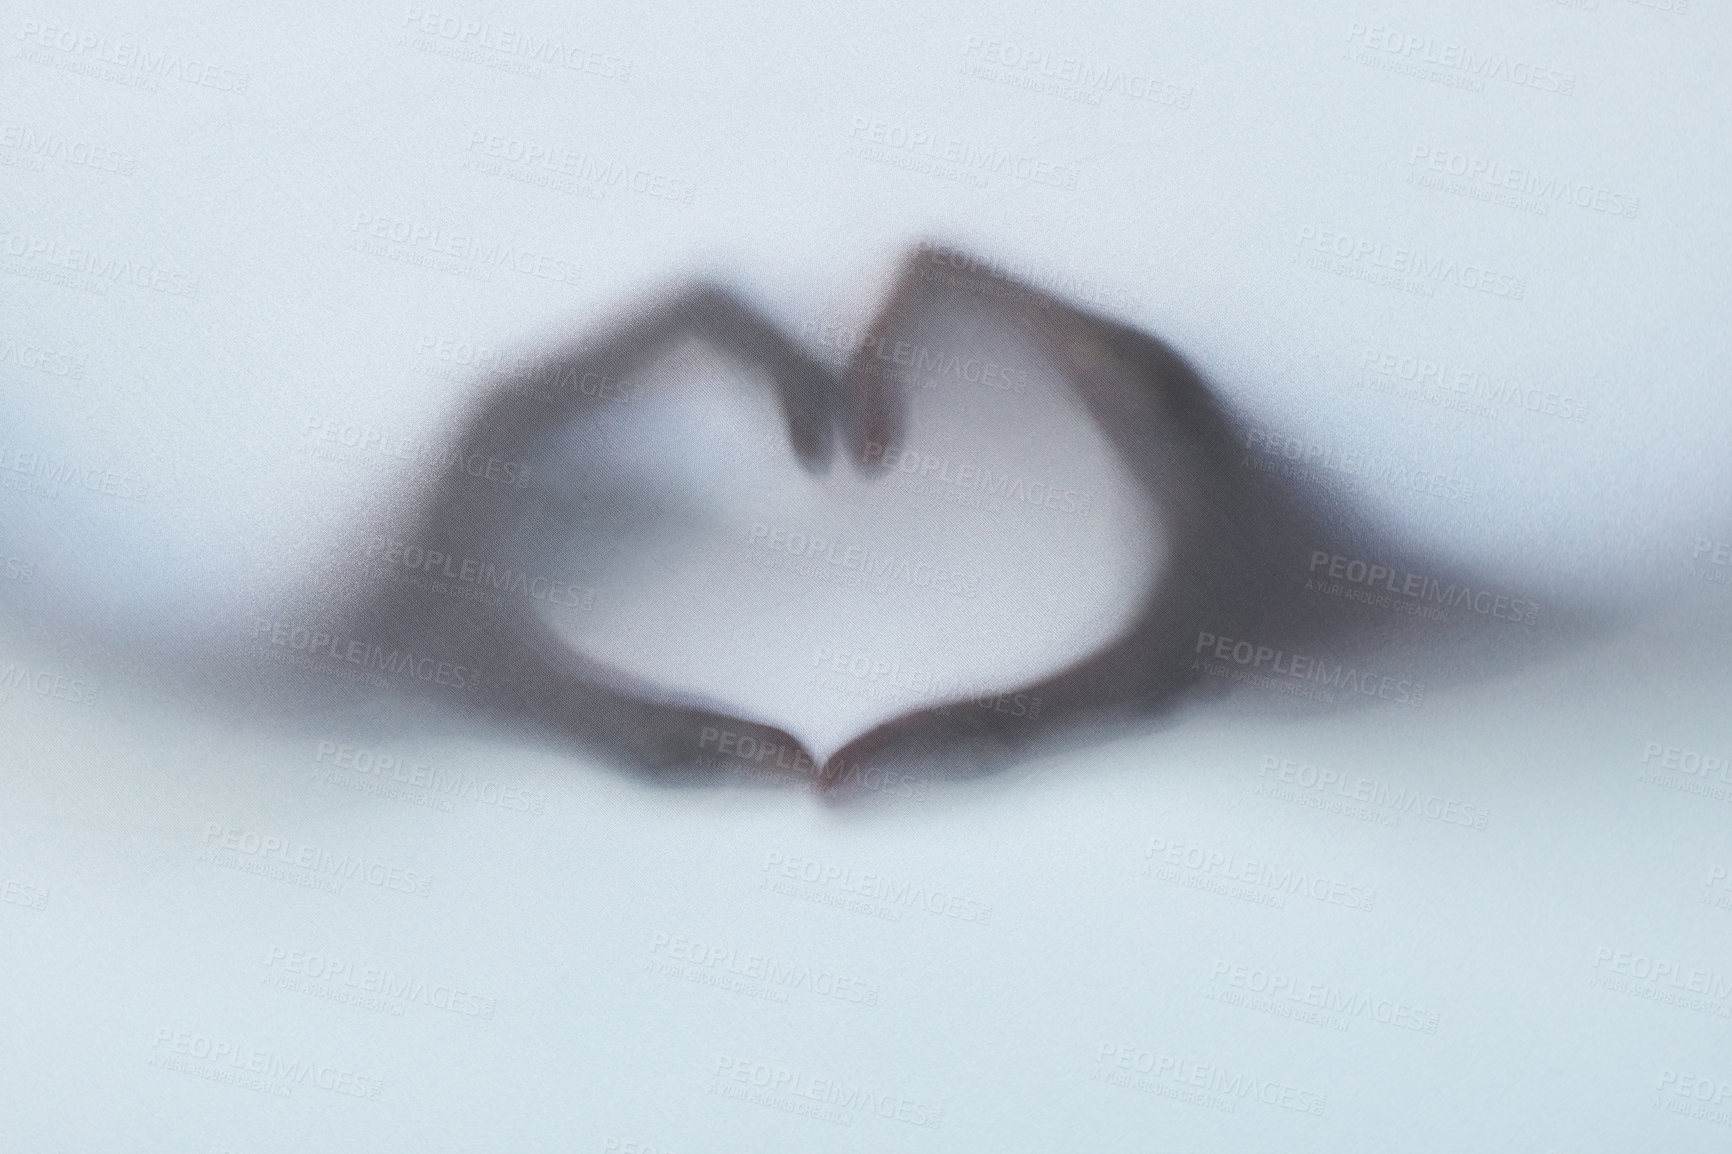 Buy stock photo Defocussed shot of two hands making a heart gesture against a plain background